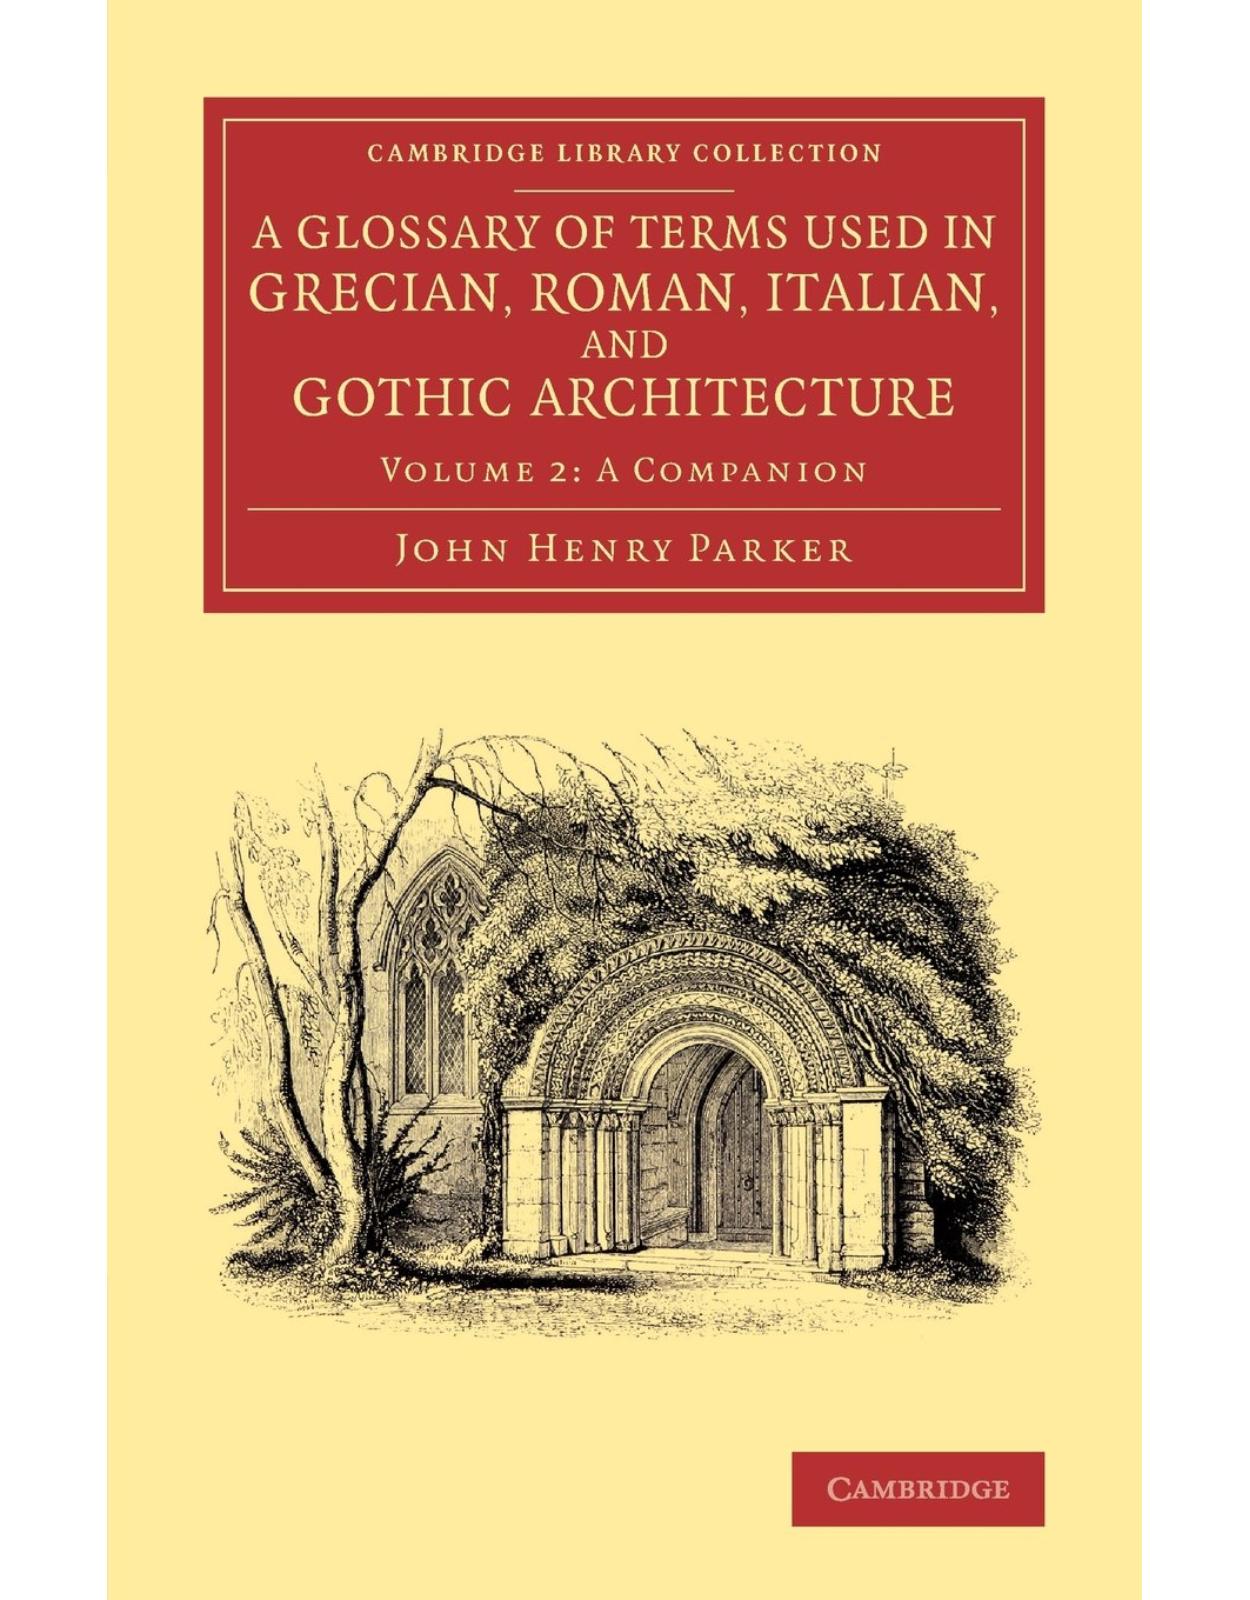 A Glossary of Terms Used in Grecian, Roman, Italian, and Gothic Architecture: Volume 2 (Cambridge Library Collection - Art and Architecture)